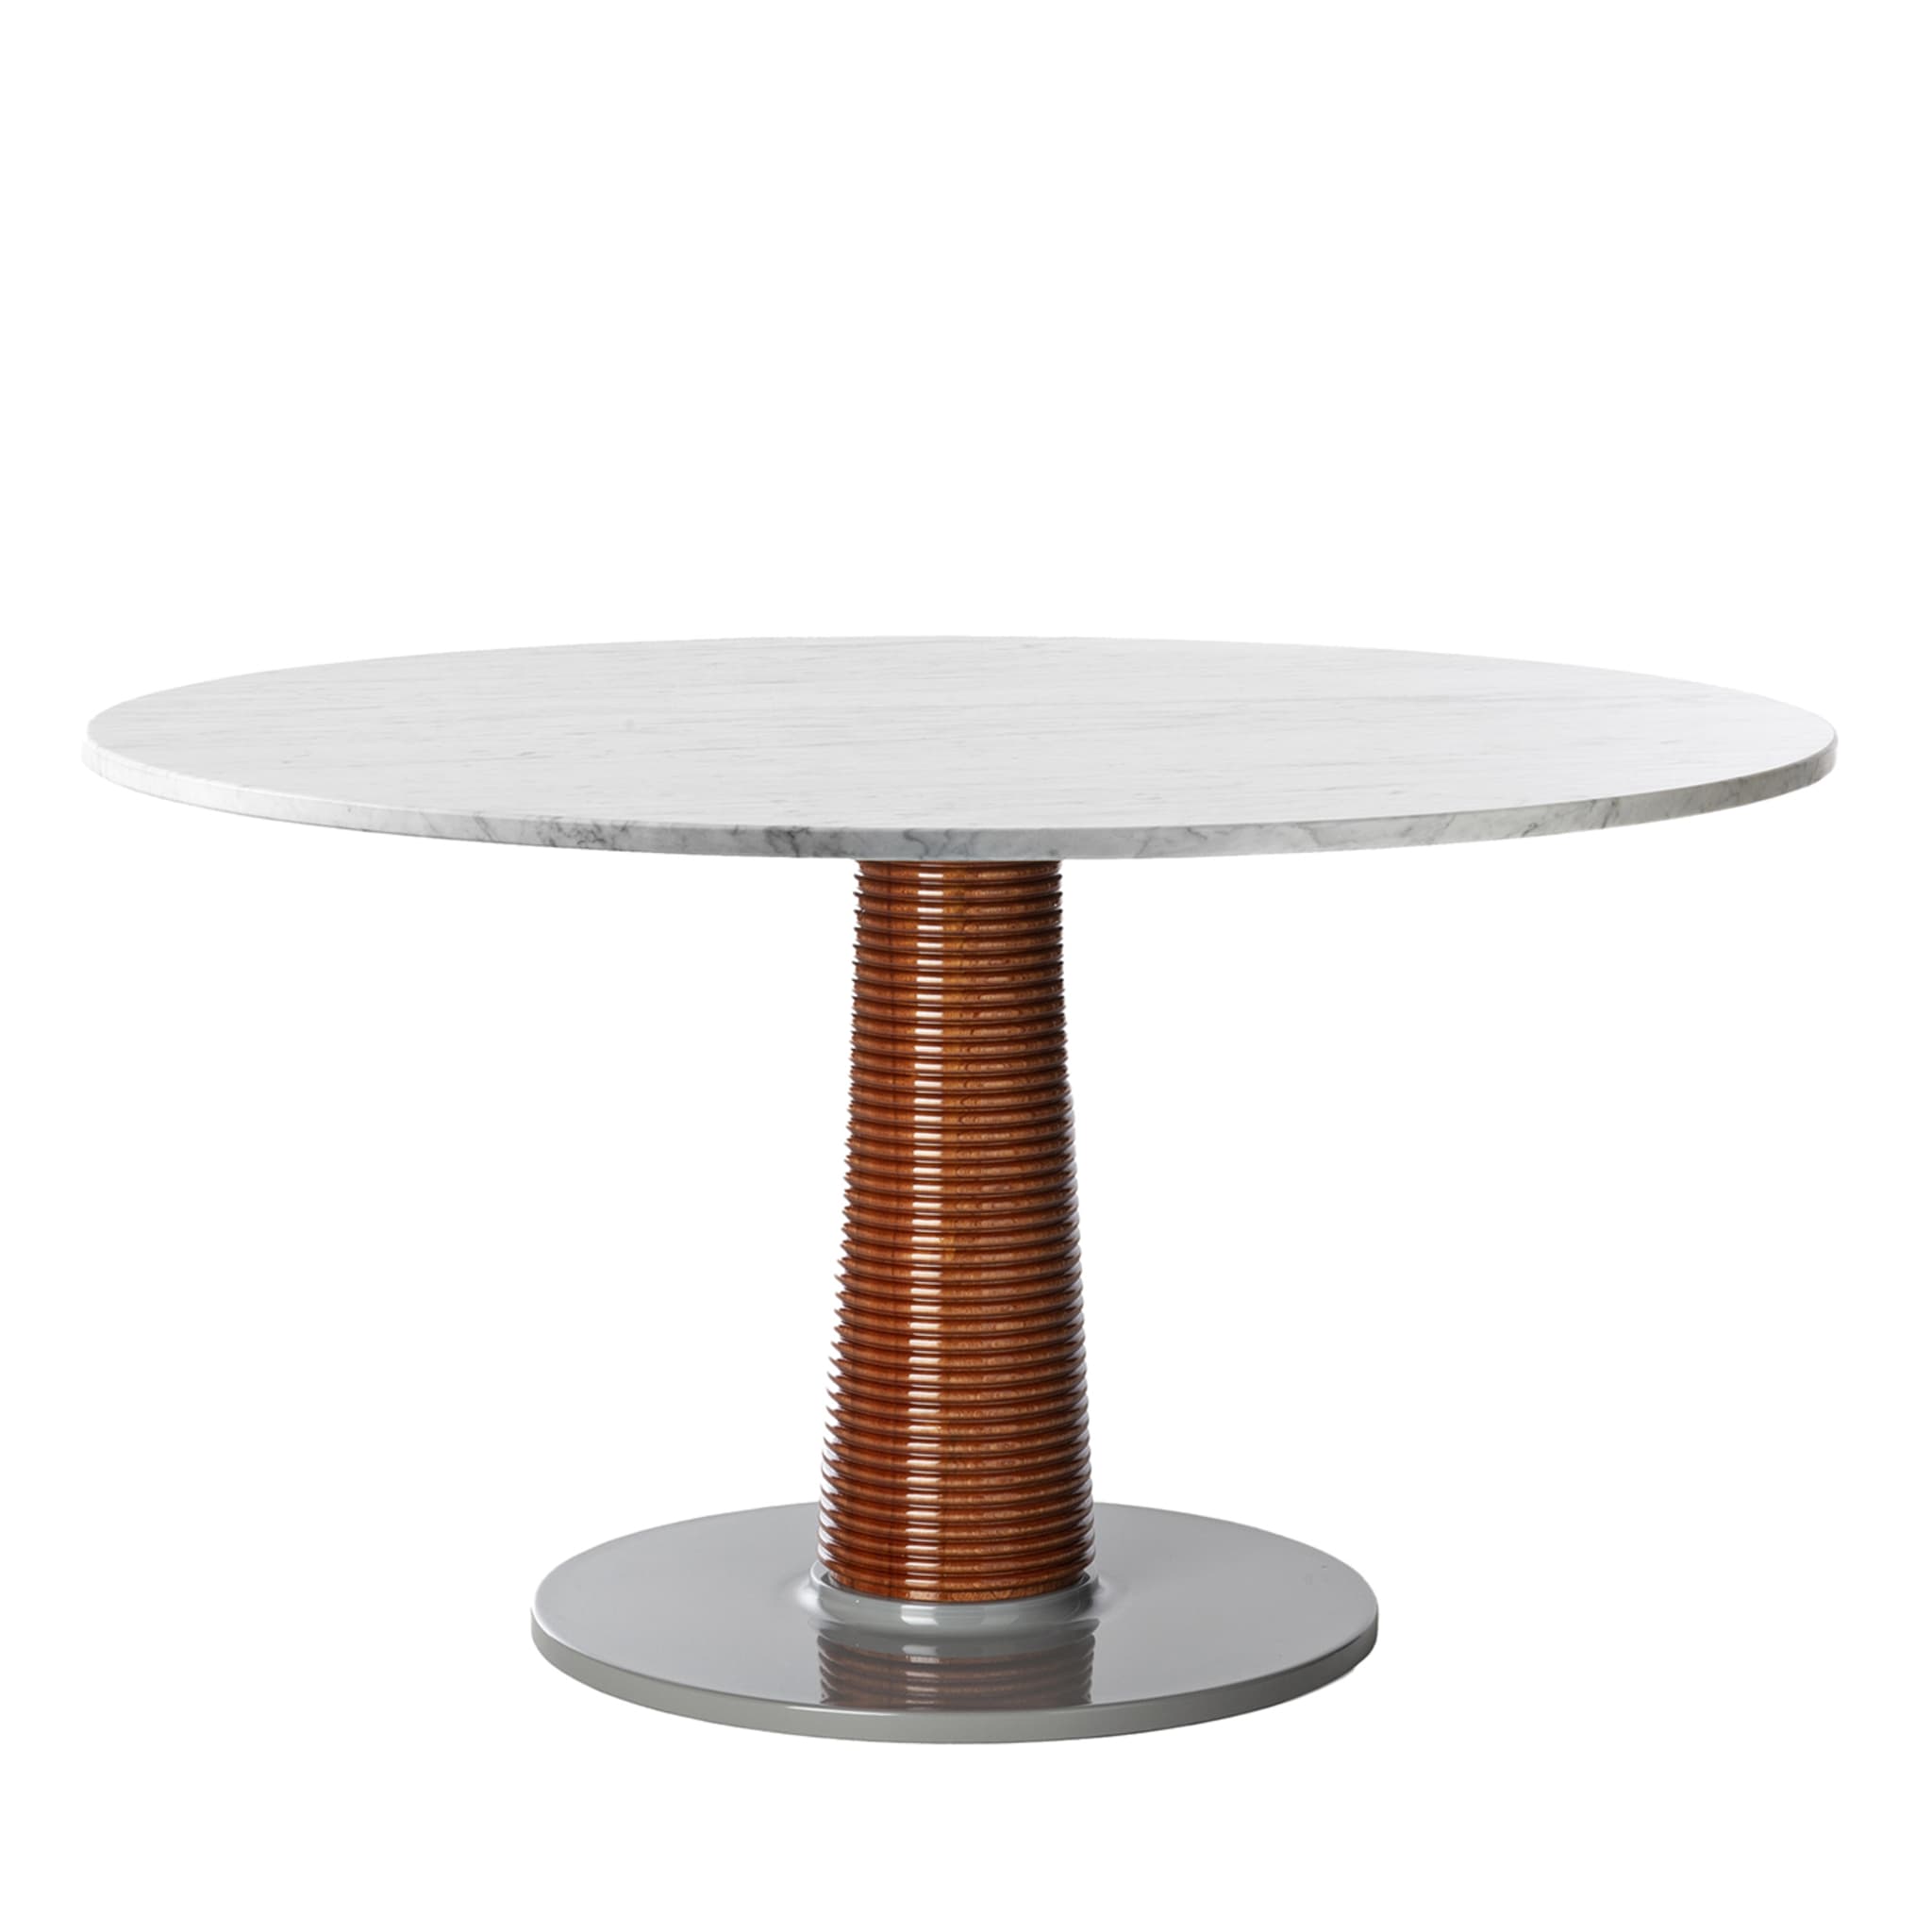 Sunset Lounge Table by Paola Navone - Main view